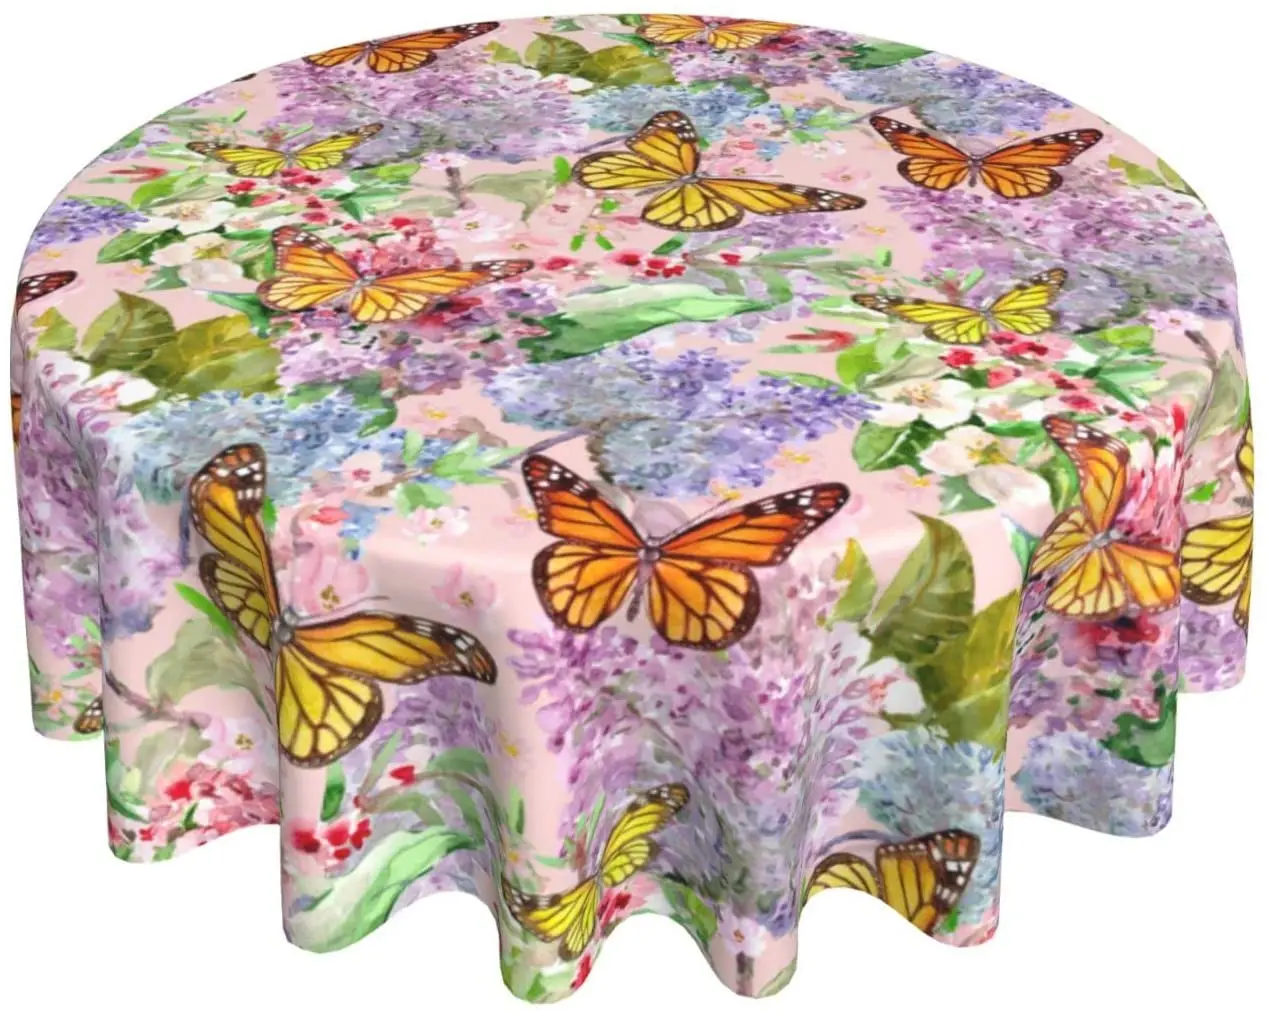 

Butterfly Tablecloth 60in Spring Watercolor Pink Floral Decorative Round Table Cloth with Dust-Proof Wrinkle Resistant for Home